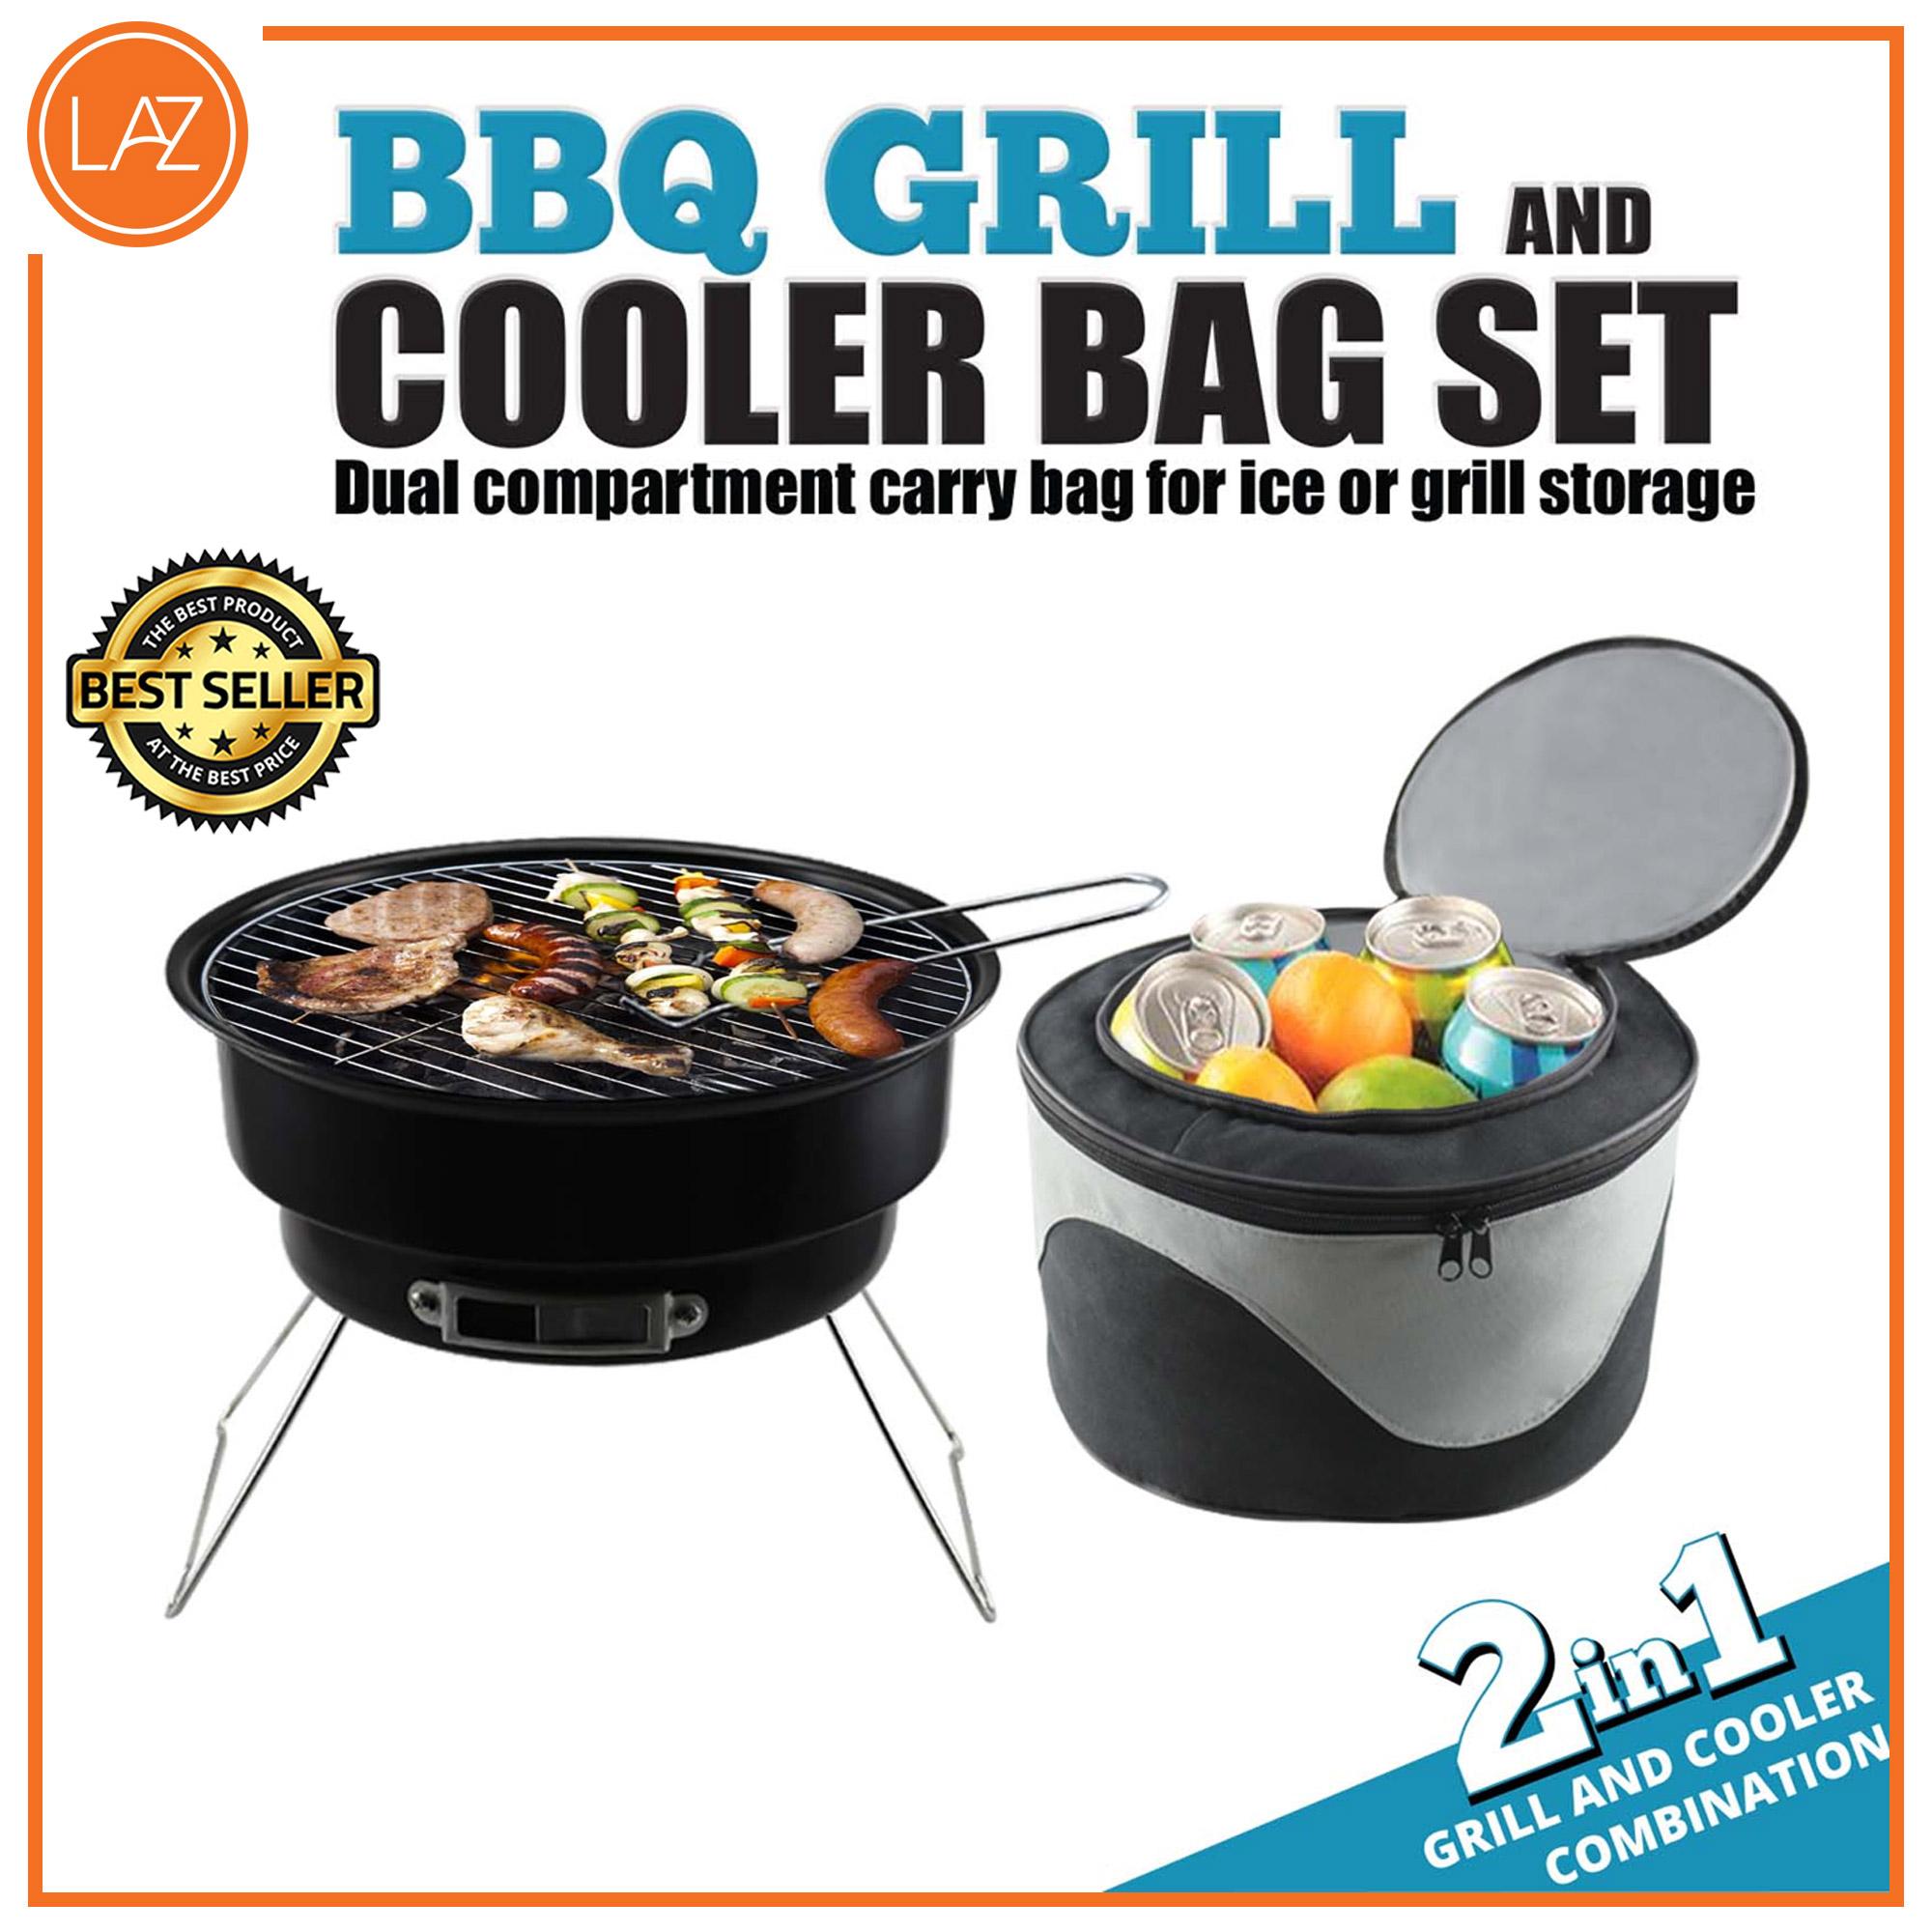 grill and oven bags